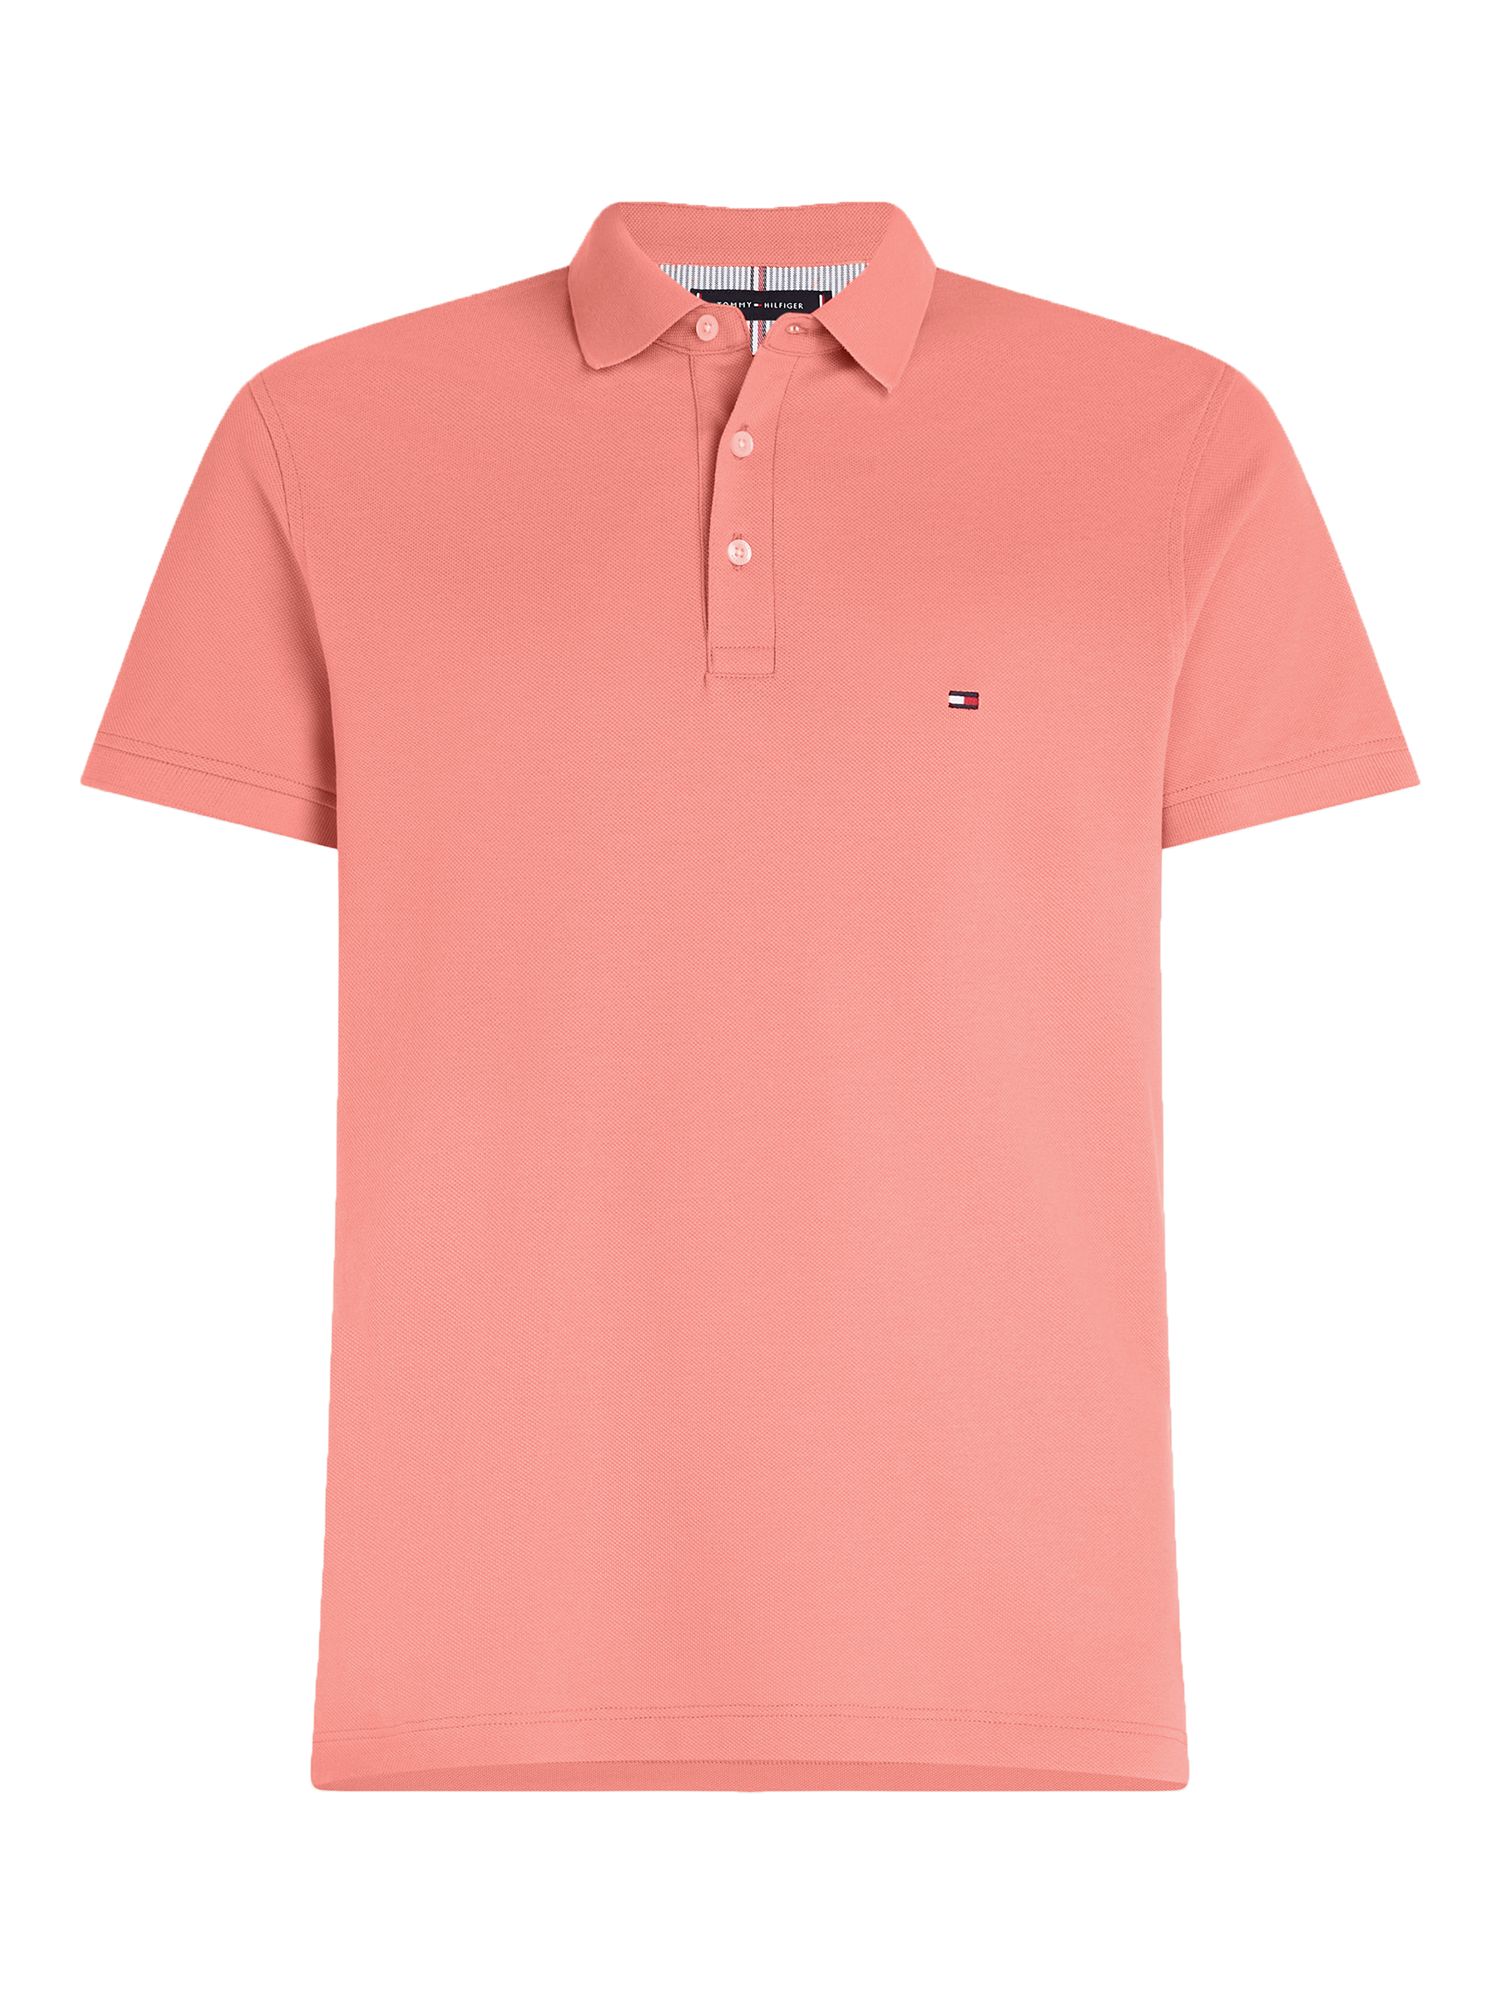 Tommy Hilfiger Classic 1985 Slim Fit Pink Polo Shirt - Clothing